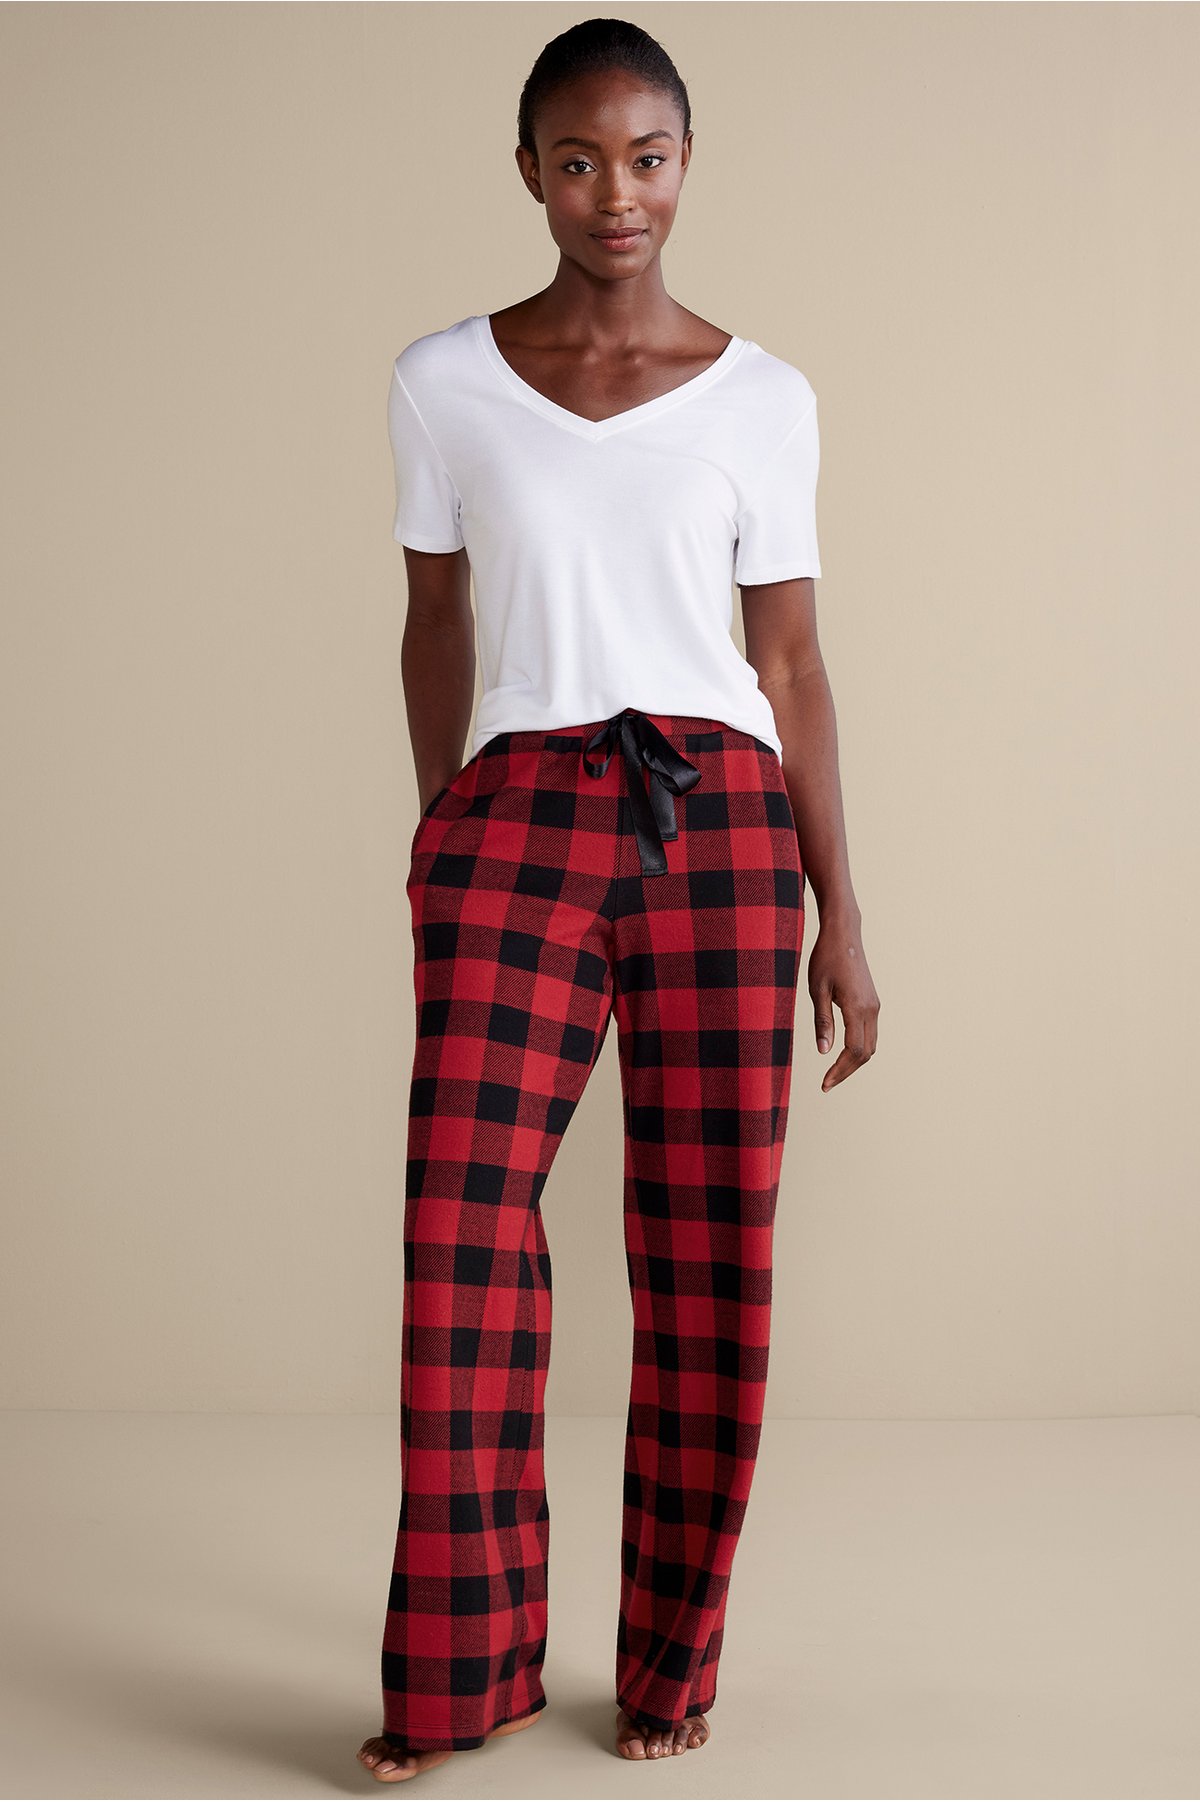 Women's Petites Mad About Plaid Pant by Soft Surro...